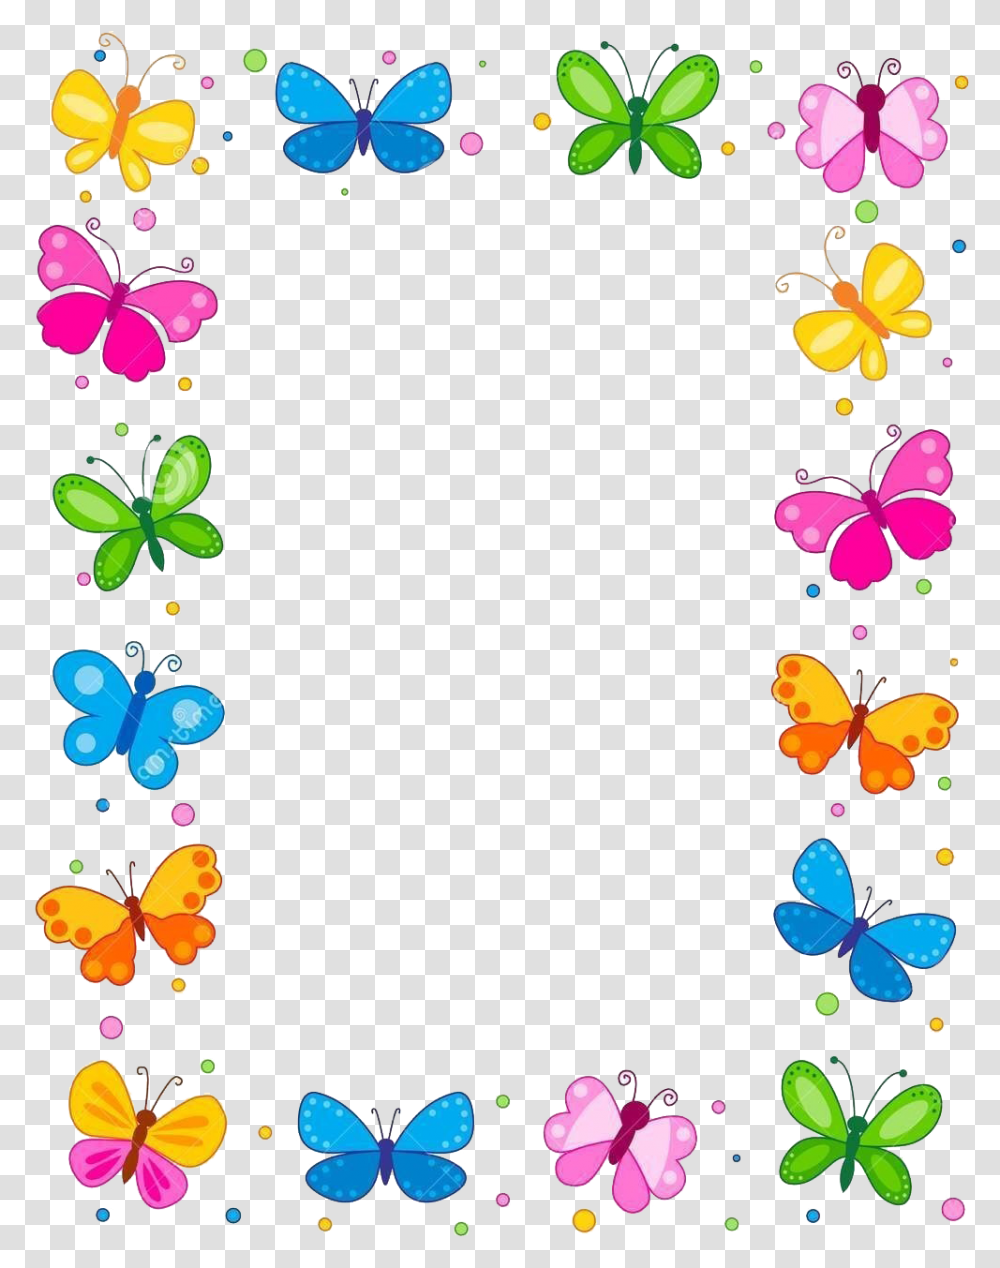 Flower Border Designs Free Download Project Flower Border Design, Floral Design, Pattern Transparent Png